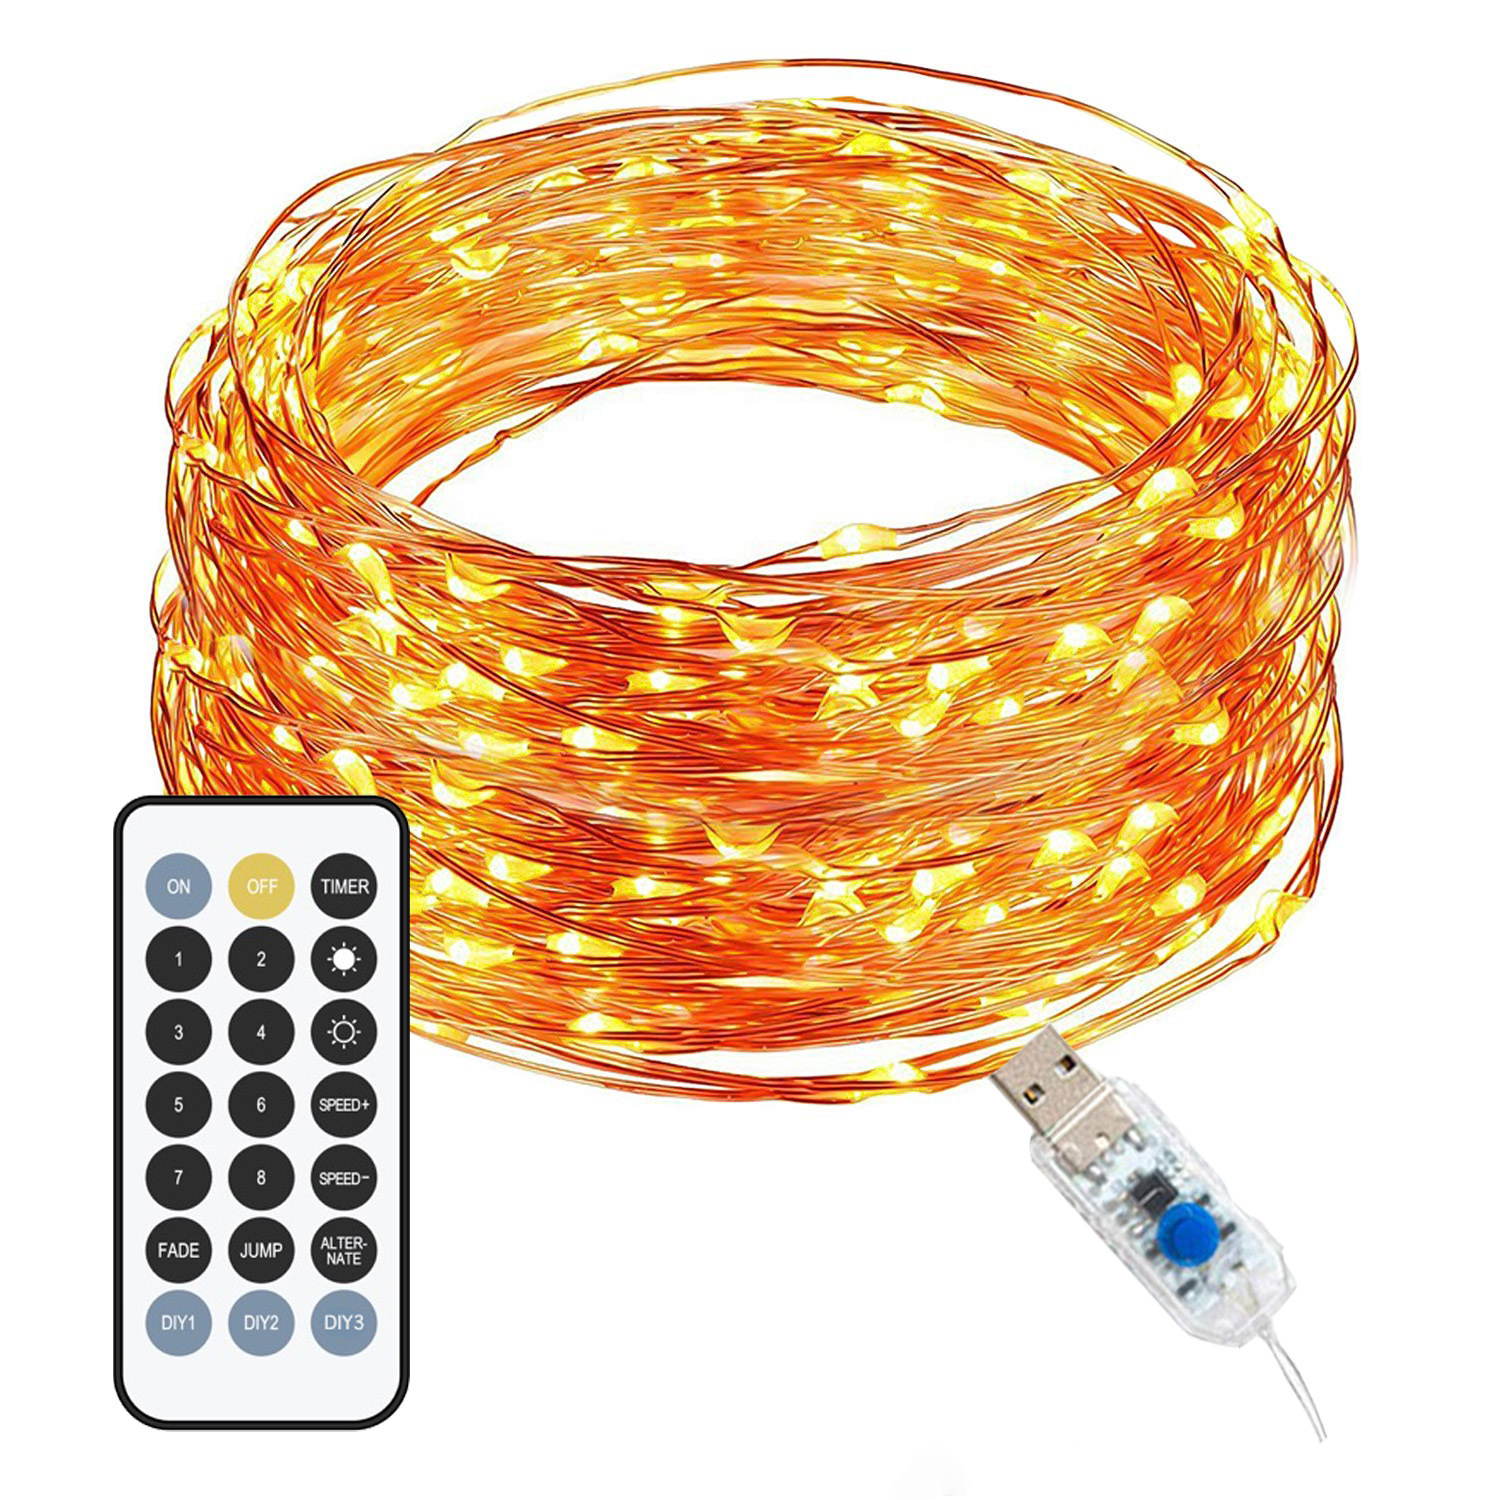 

DC5V USB 5M 50LEDs Warm White Pure White RGB 8 Modes Copper Wire String Light DIY Outdoor Holiday Lamp